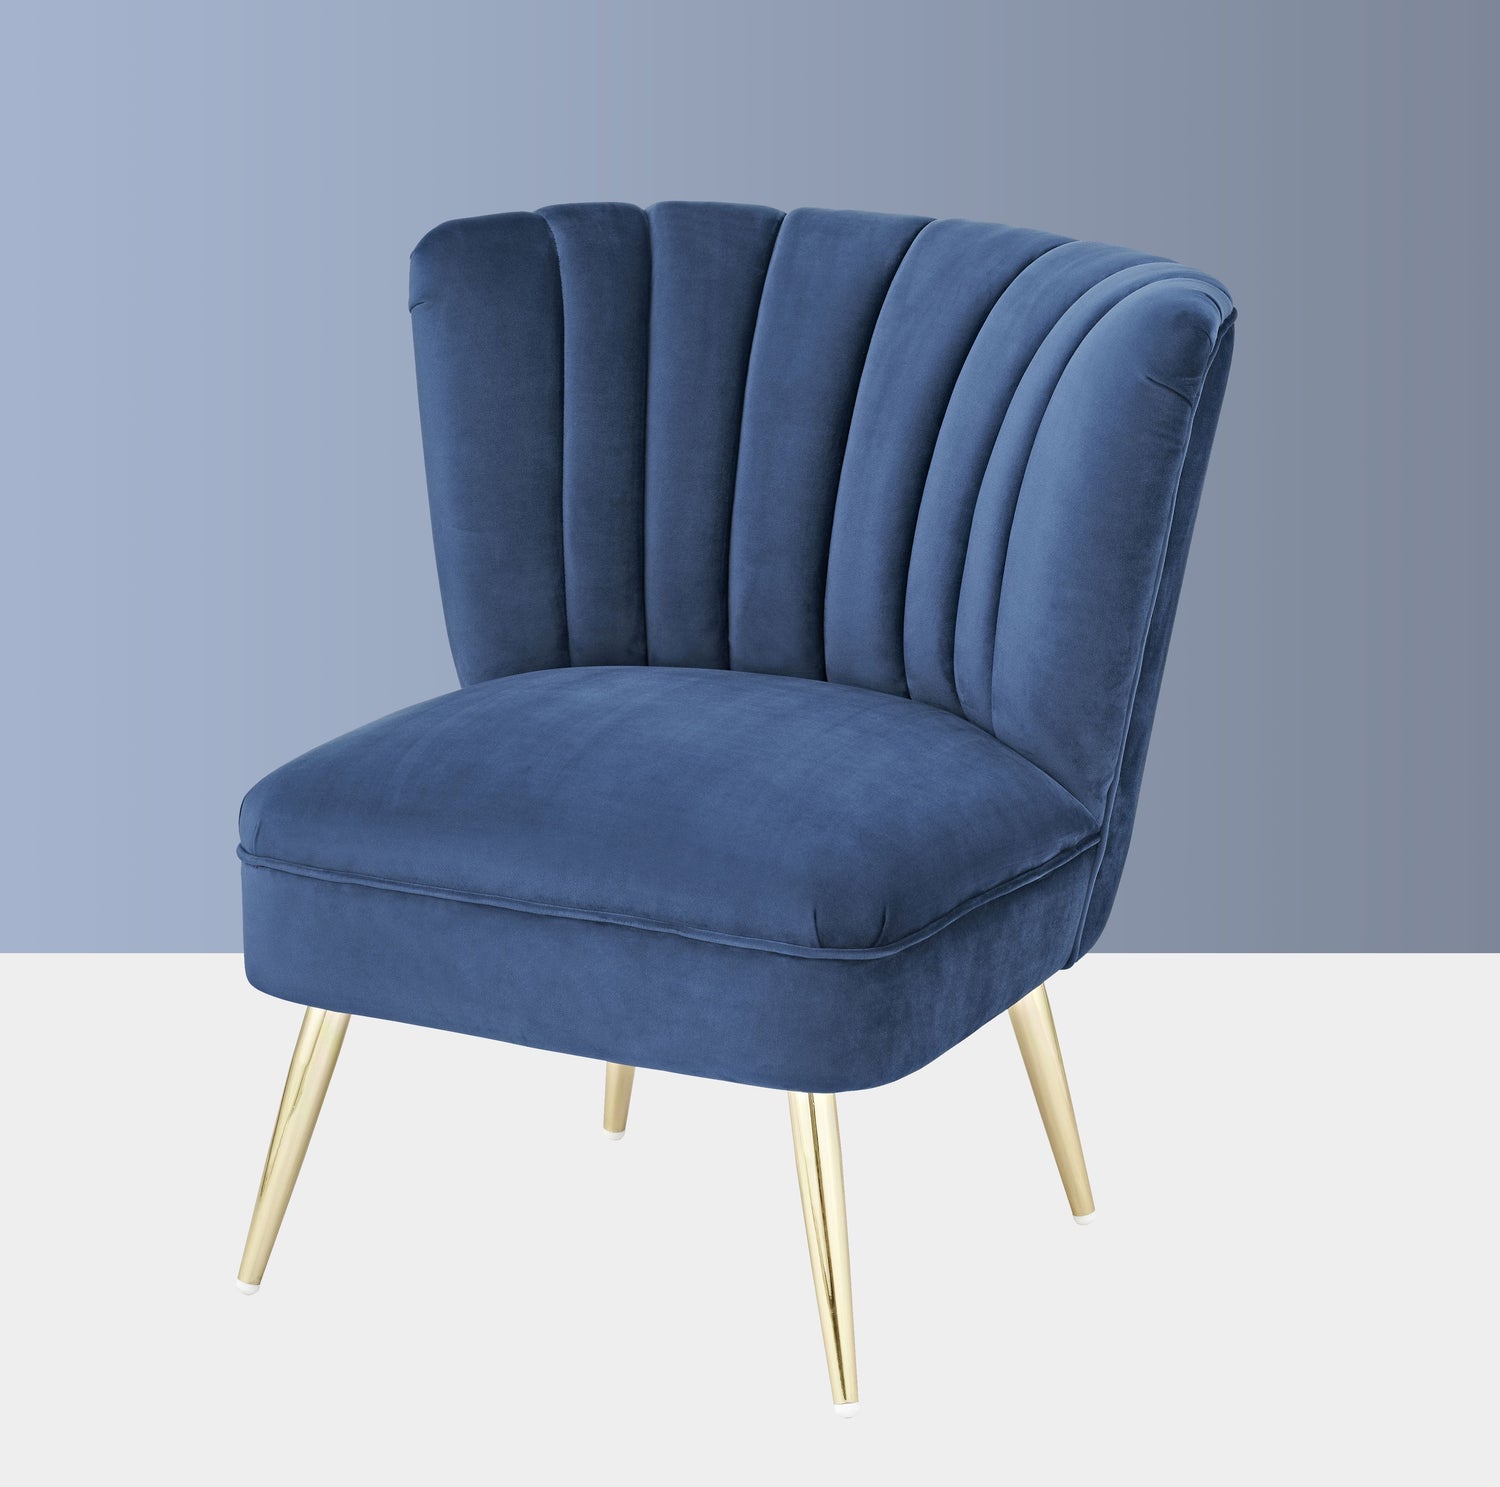 Quince | Cocktail Chair in Midnight Blue